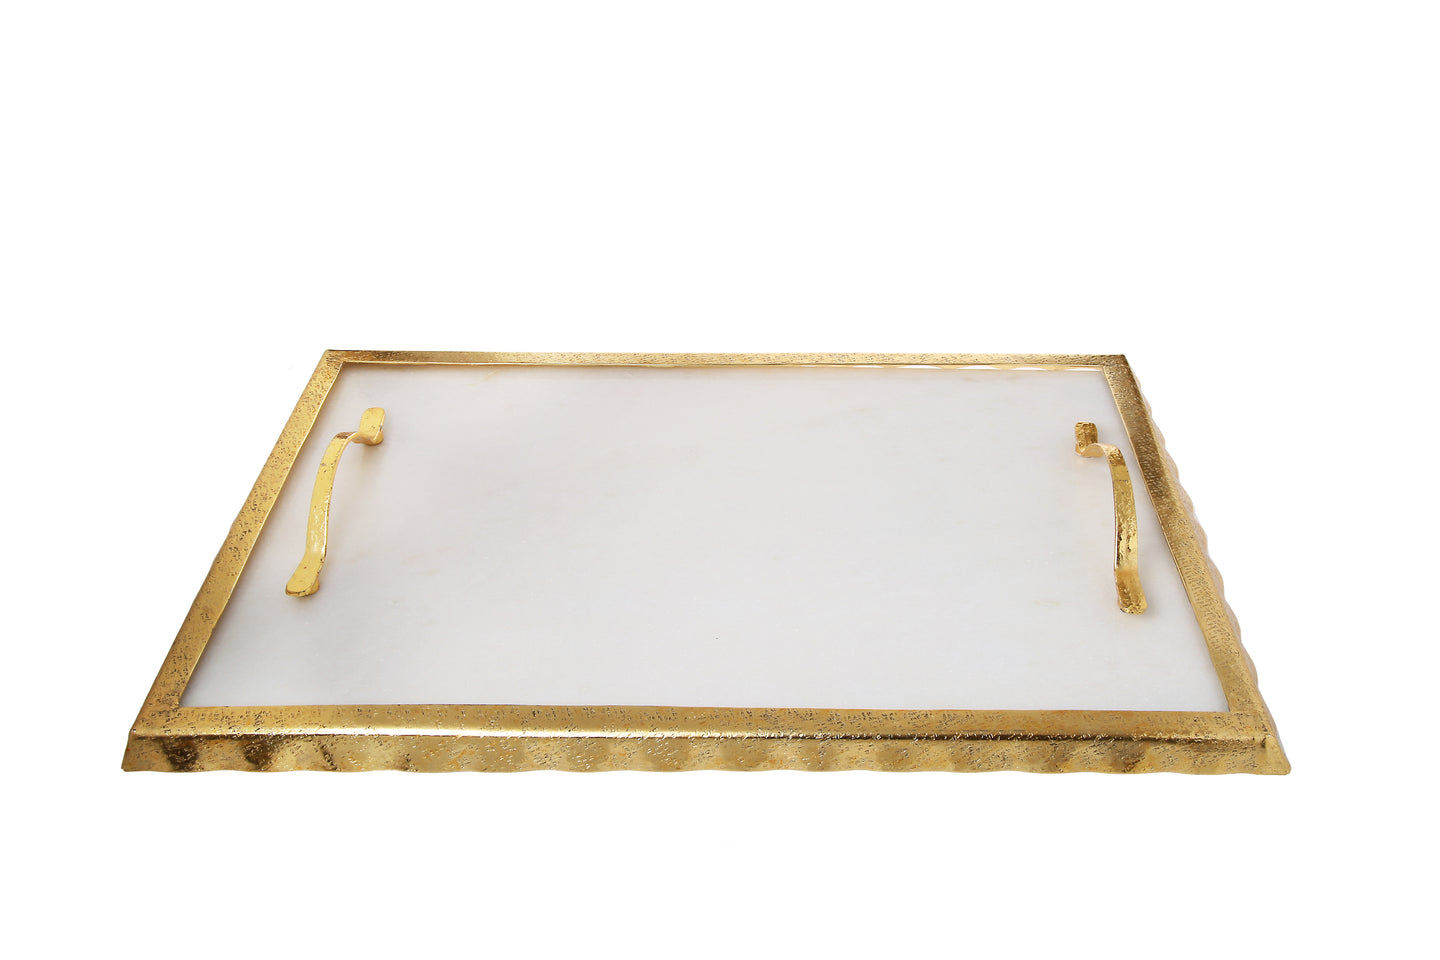 White Marble Challah Tray With Gold Rim And Handles - 17 .25